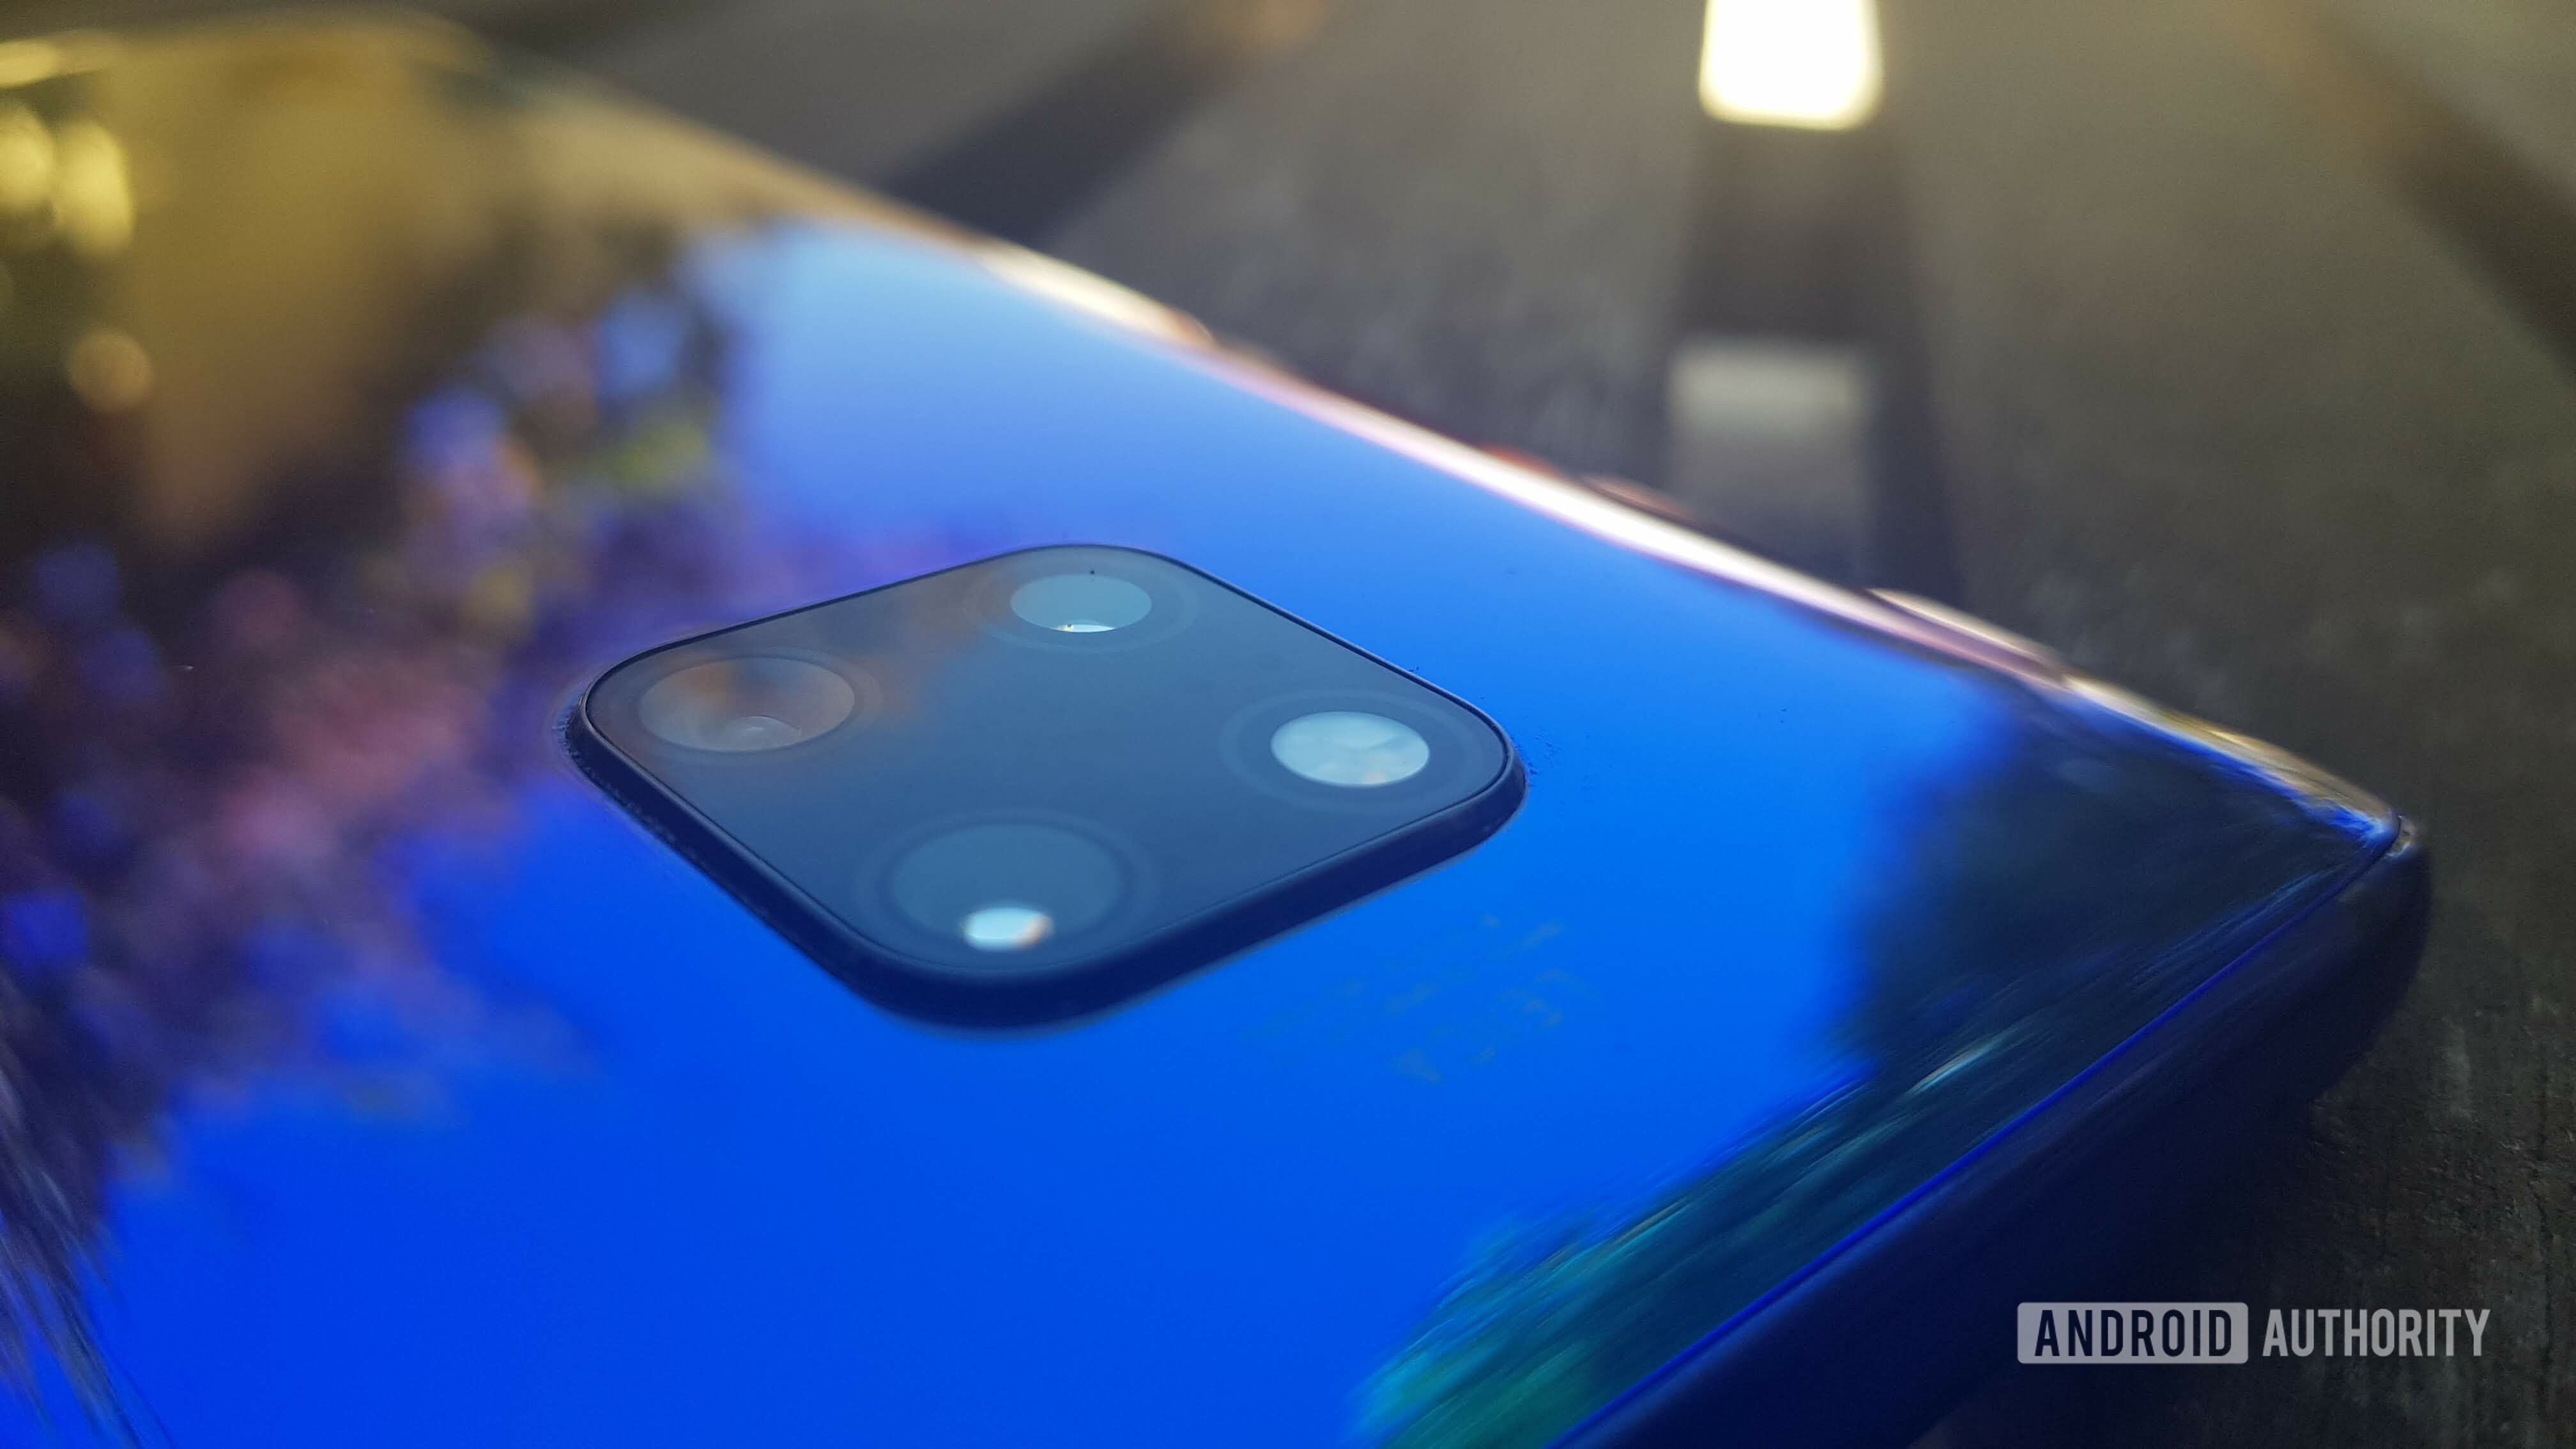 The back of the Huawei Mate 20 Pro, showing the tripple camera bump.